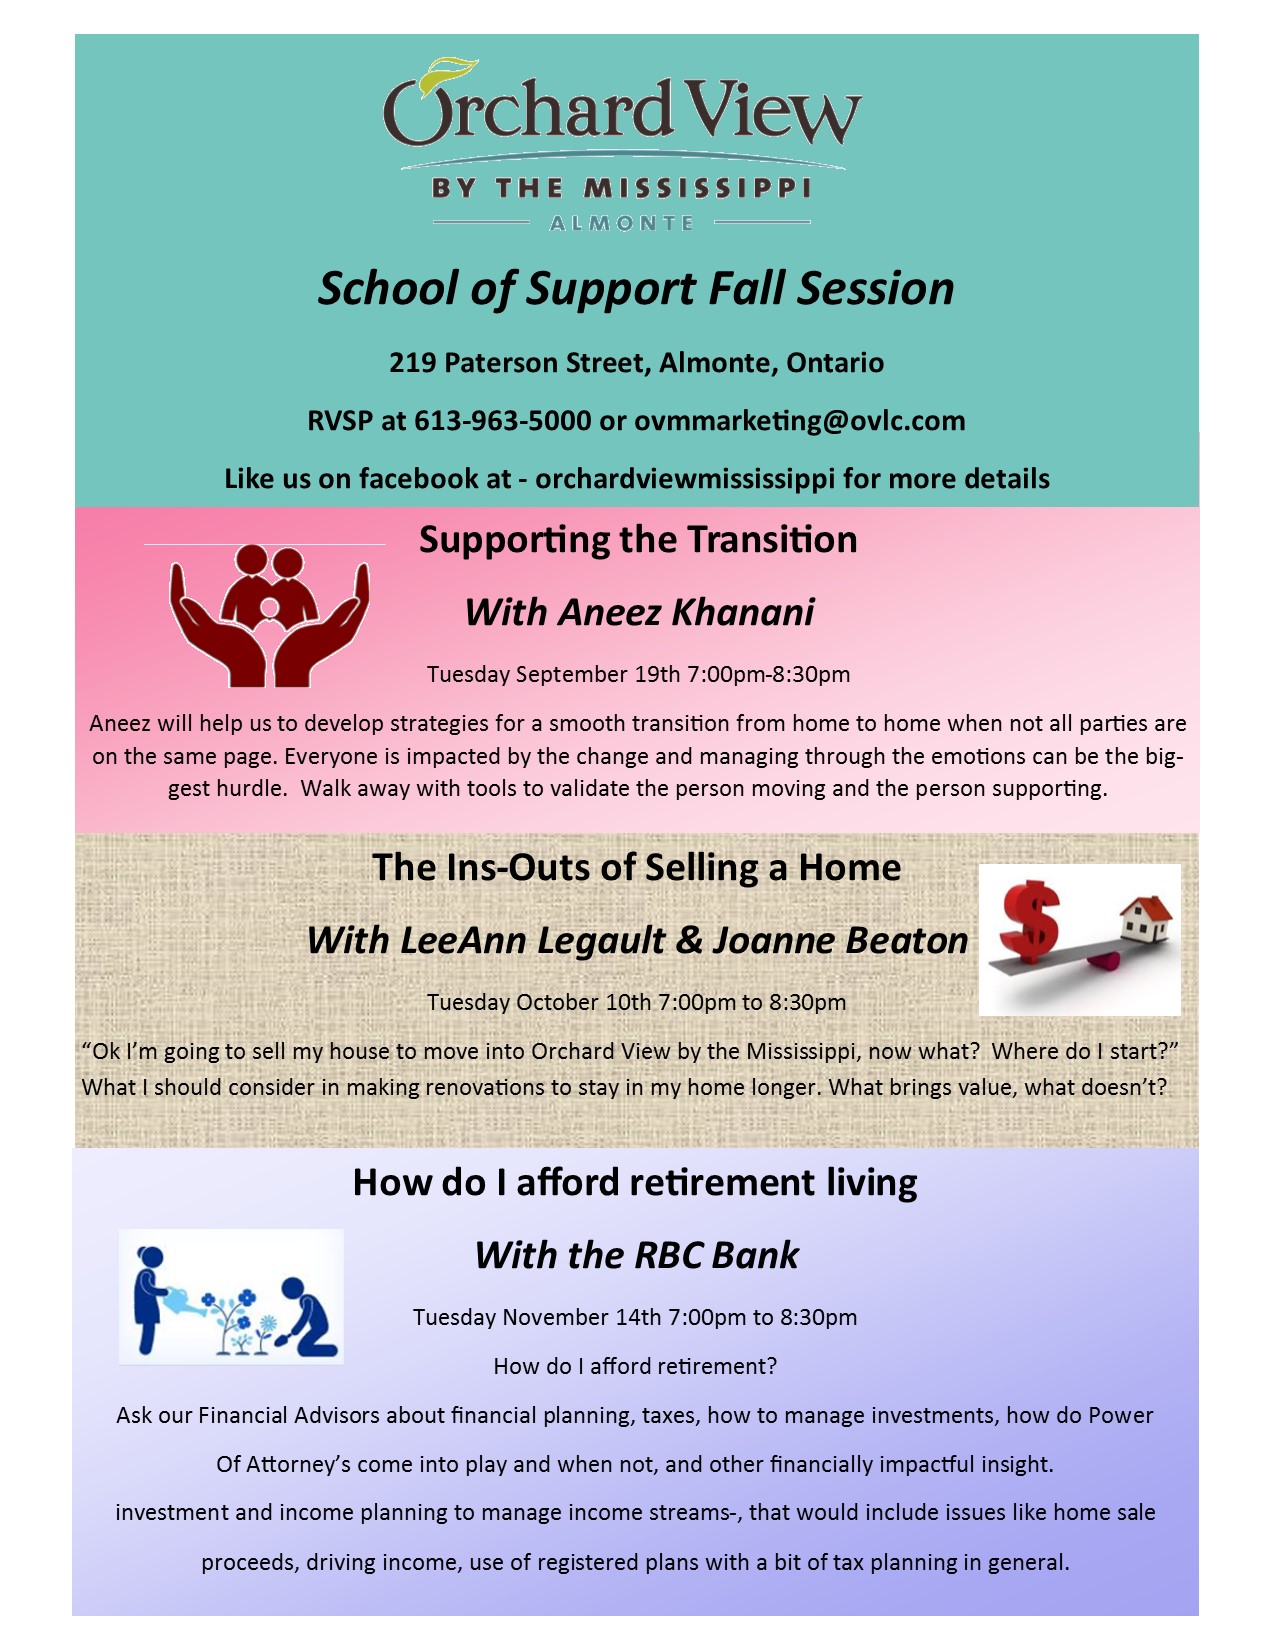 Orchard View by the Mississippi School of Support: Supporting the Transition with Aneez Khanani. The ins&outs of selling your home with LeeAnn Legault & Joanne Beaton. How do I afford retirement living with RBC Bank. Call to RSVP at 613.963.5000